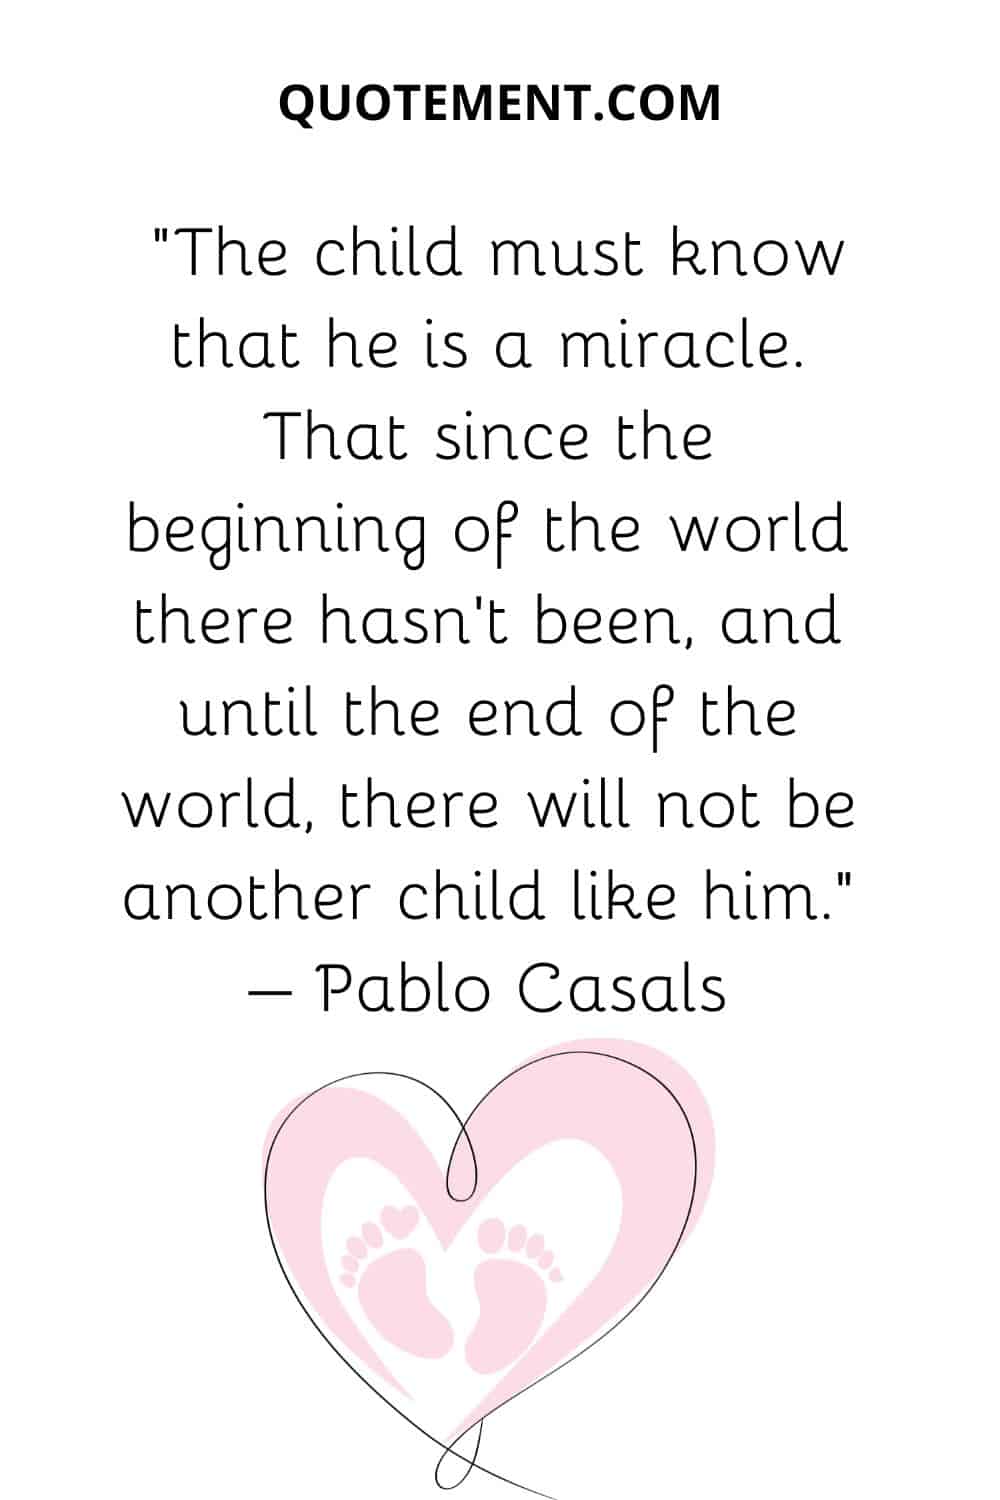 The child must know that he is a miracle